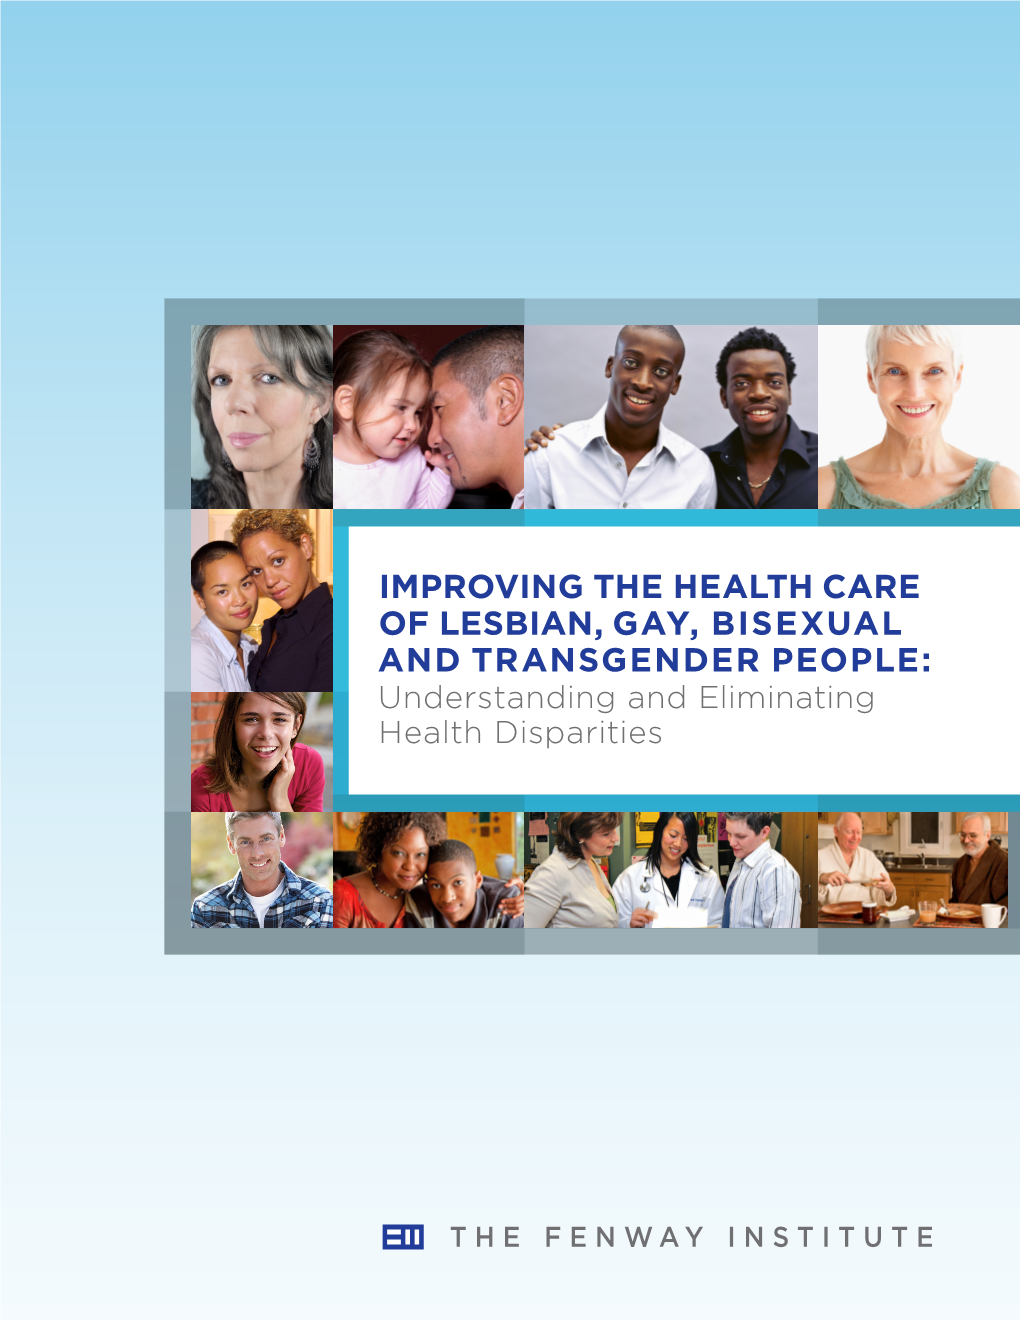 IMPROVING the HEALTH CARE of LESBIAN, GAY, BISEXUAL and TRANSGENDER PEOPLE: Understanding and Eliminating Health Disparities